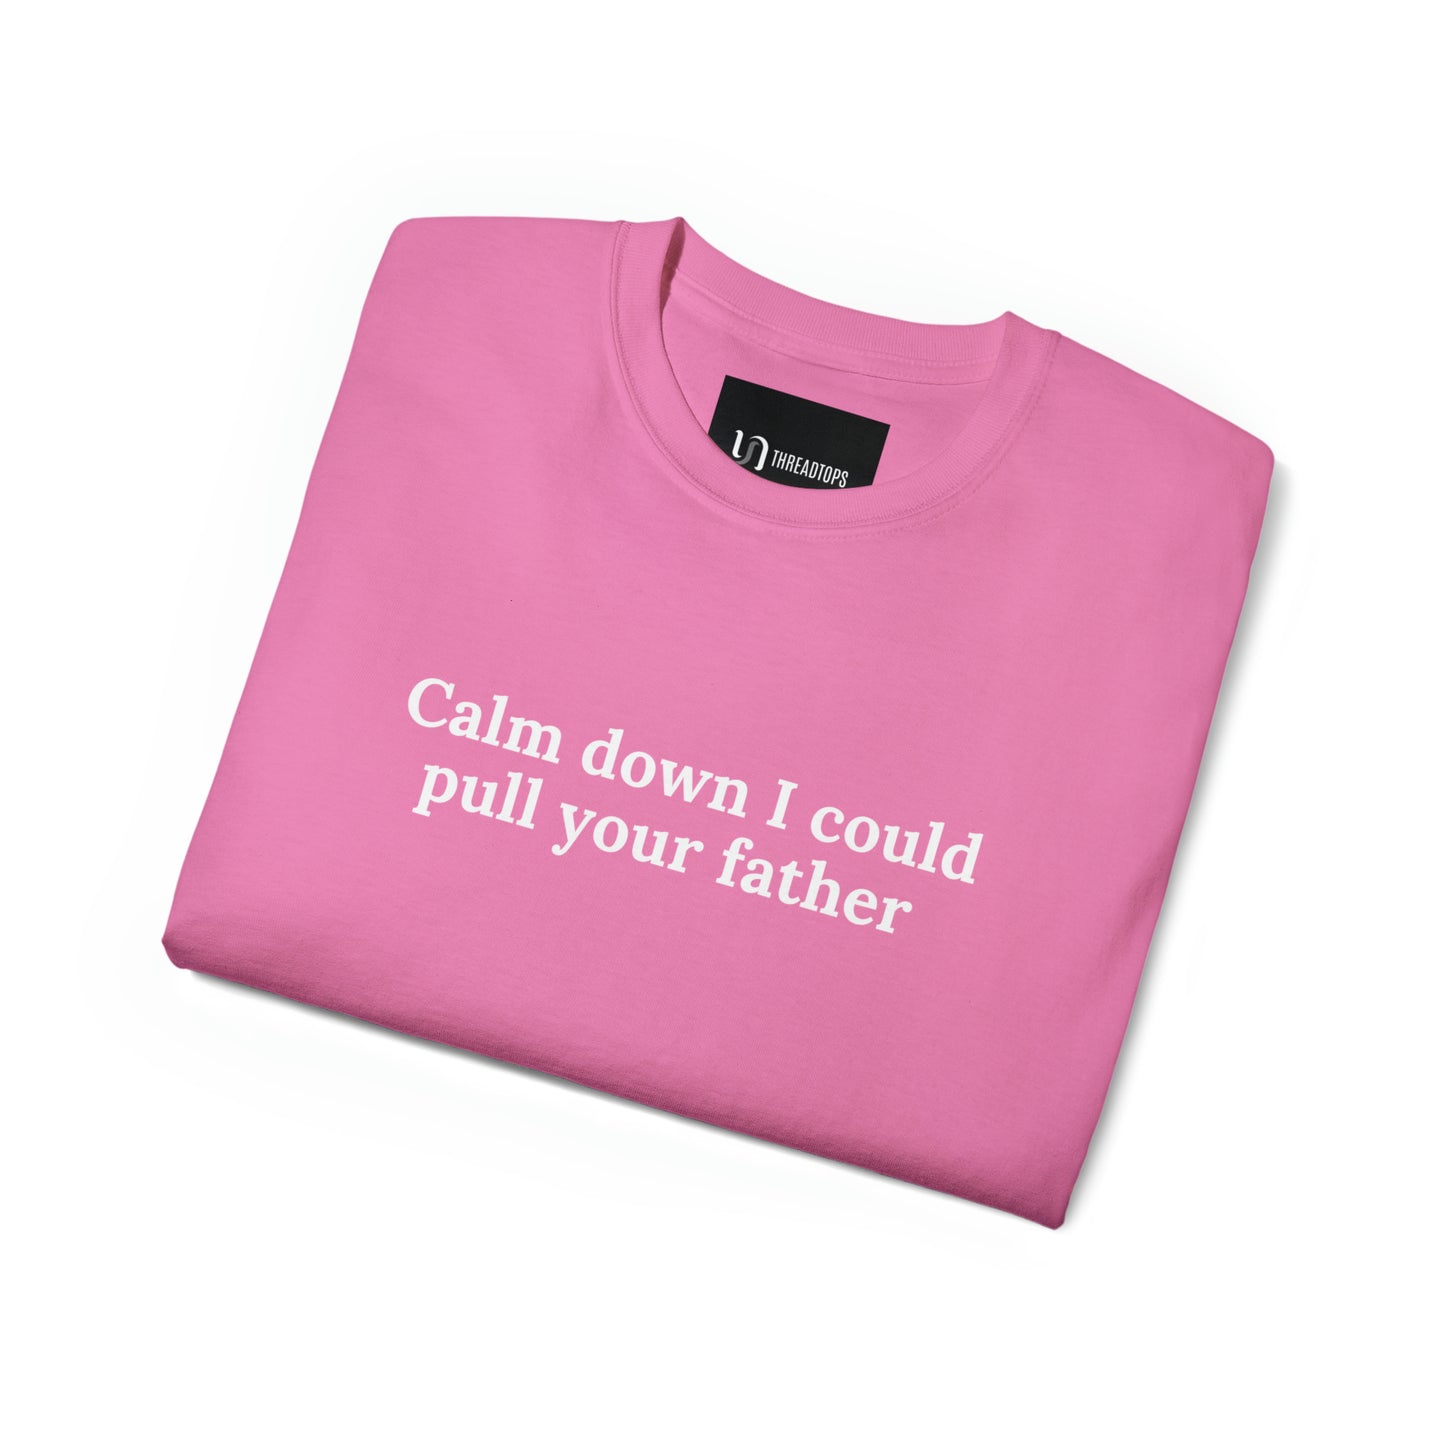 Calm down I could pull your father | Tee